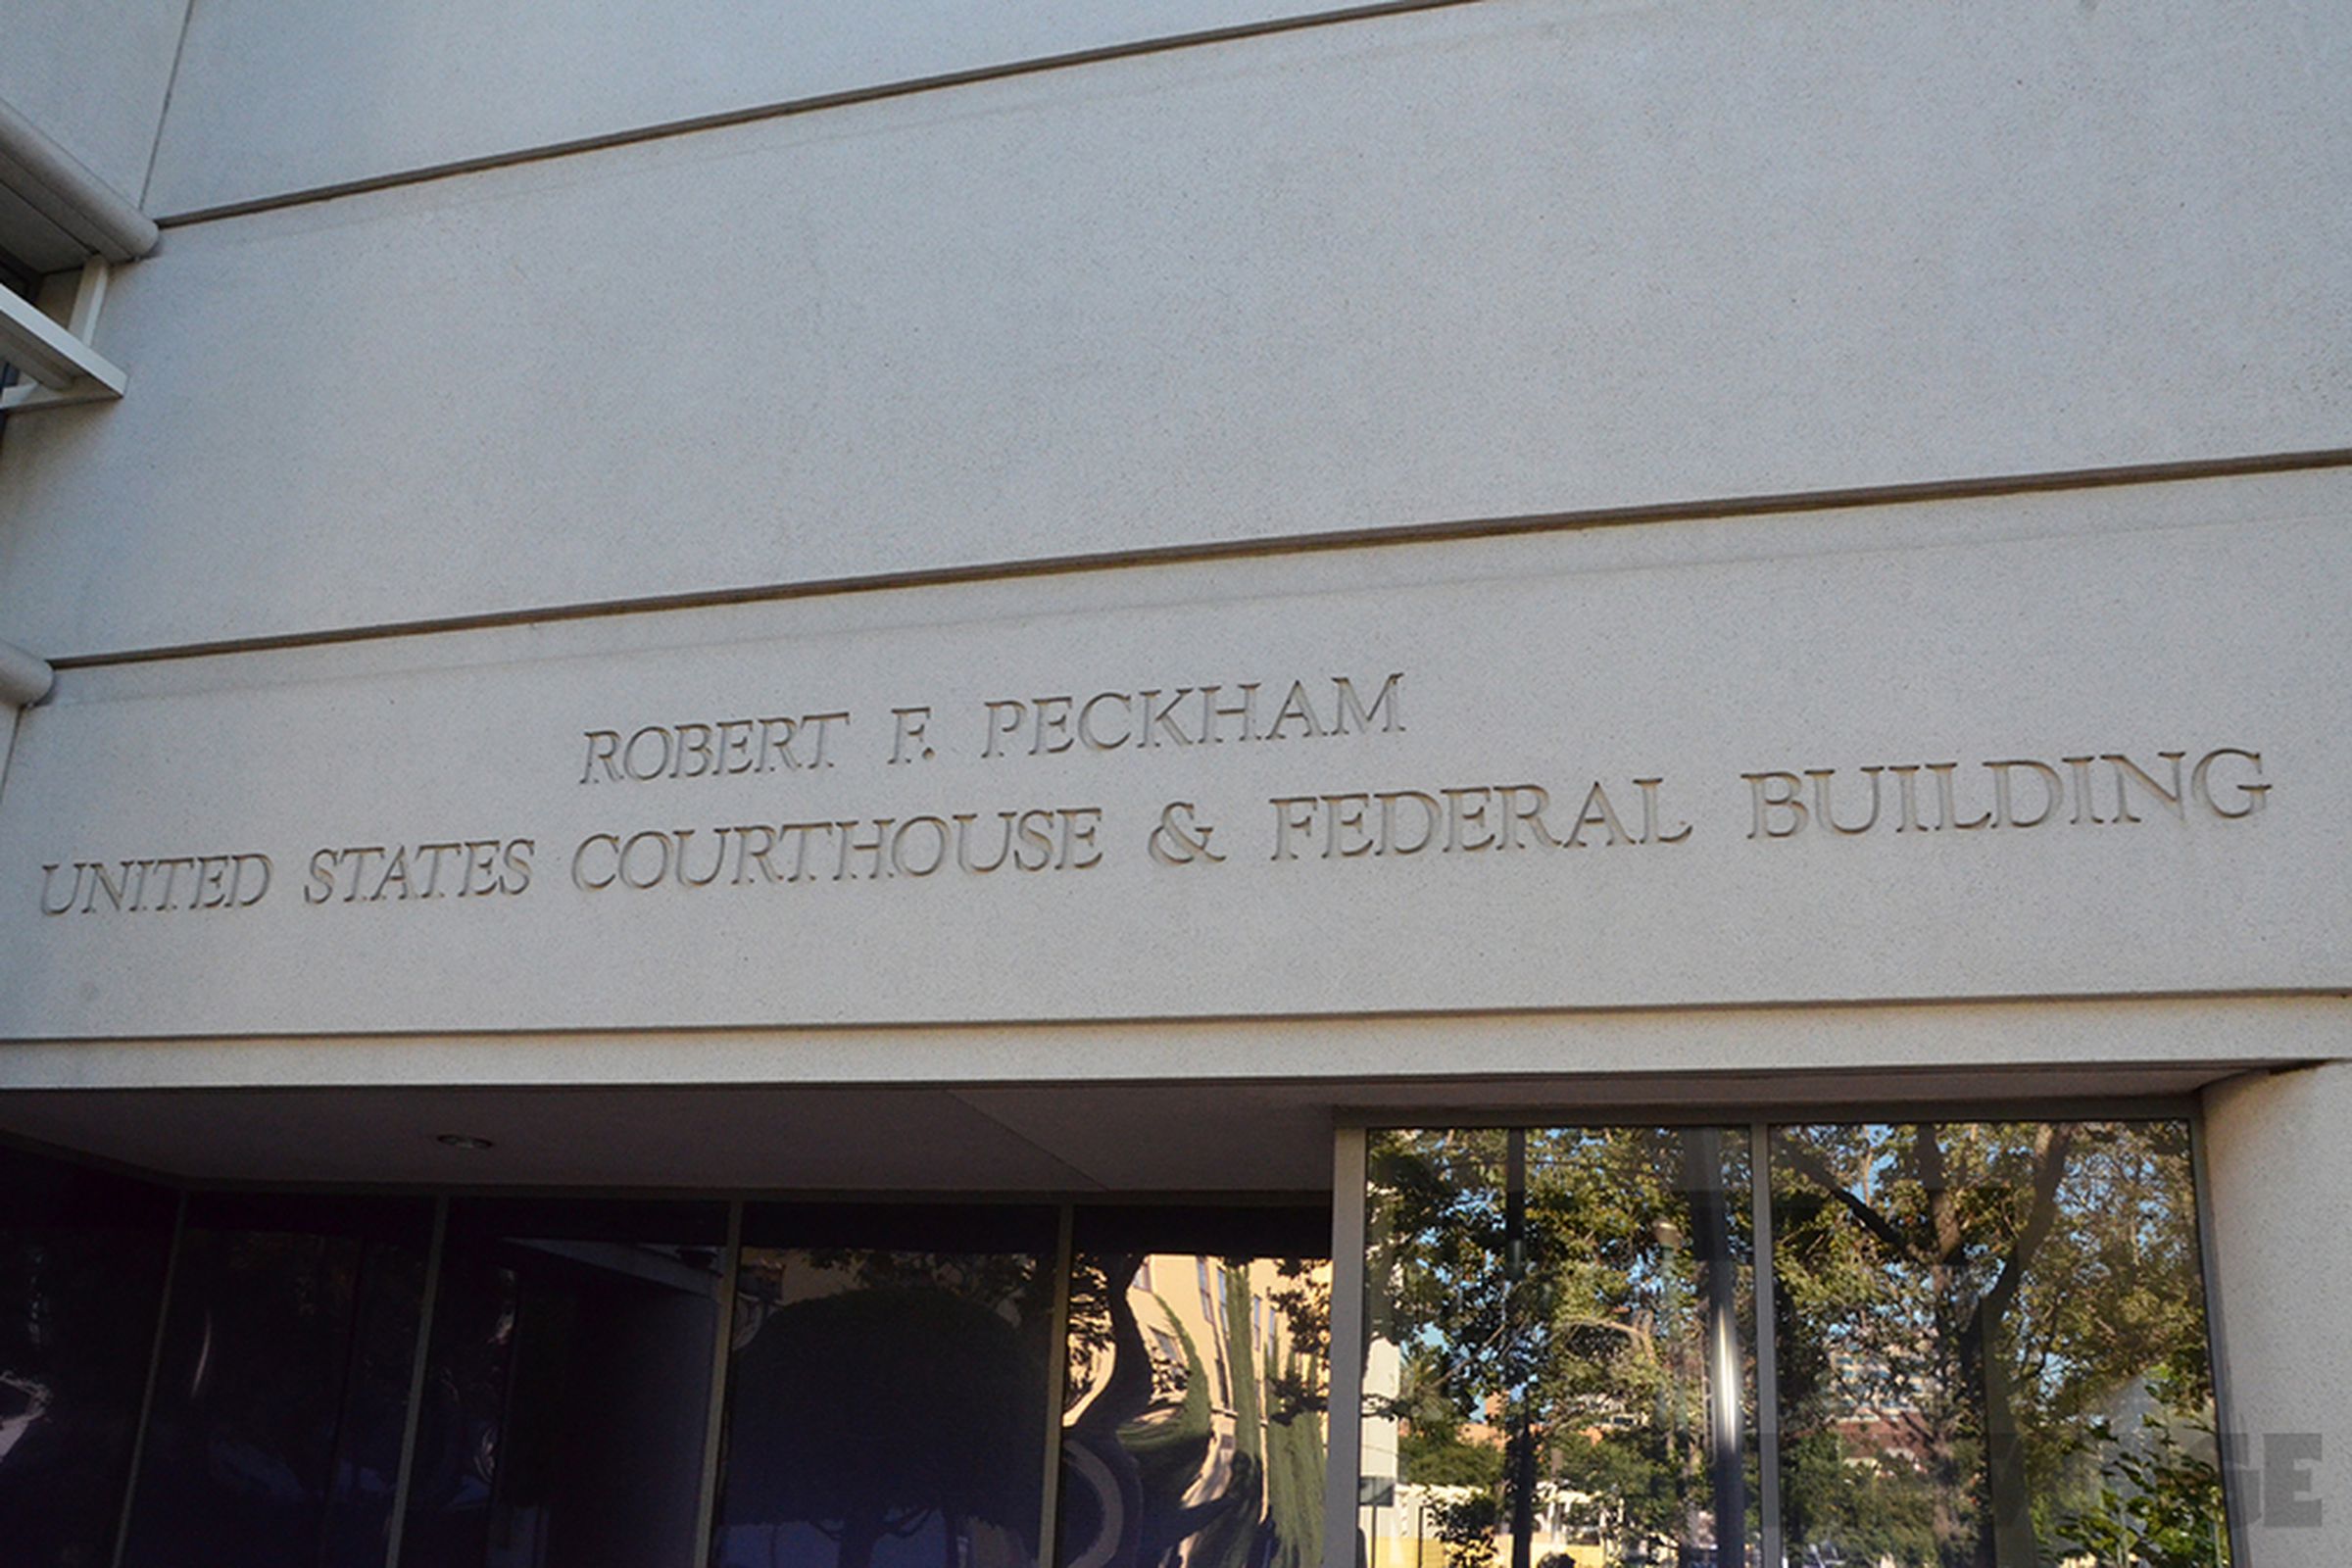 Robert Peckham Federal Building and Courthouse